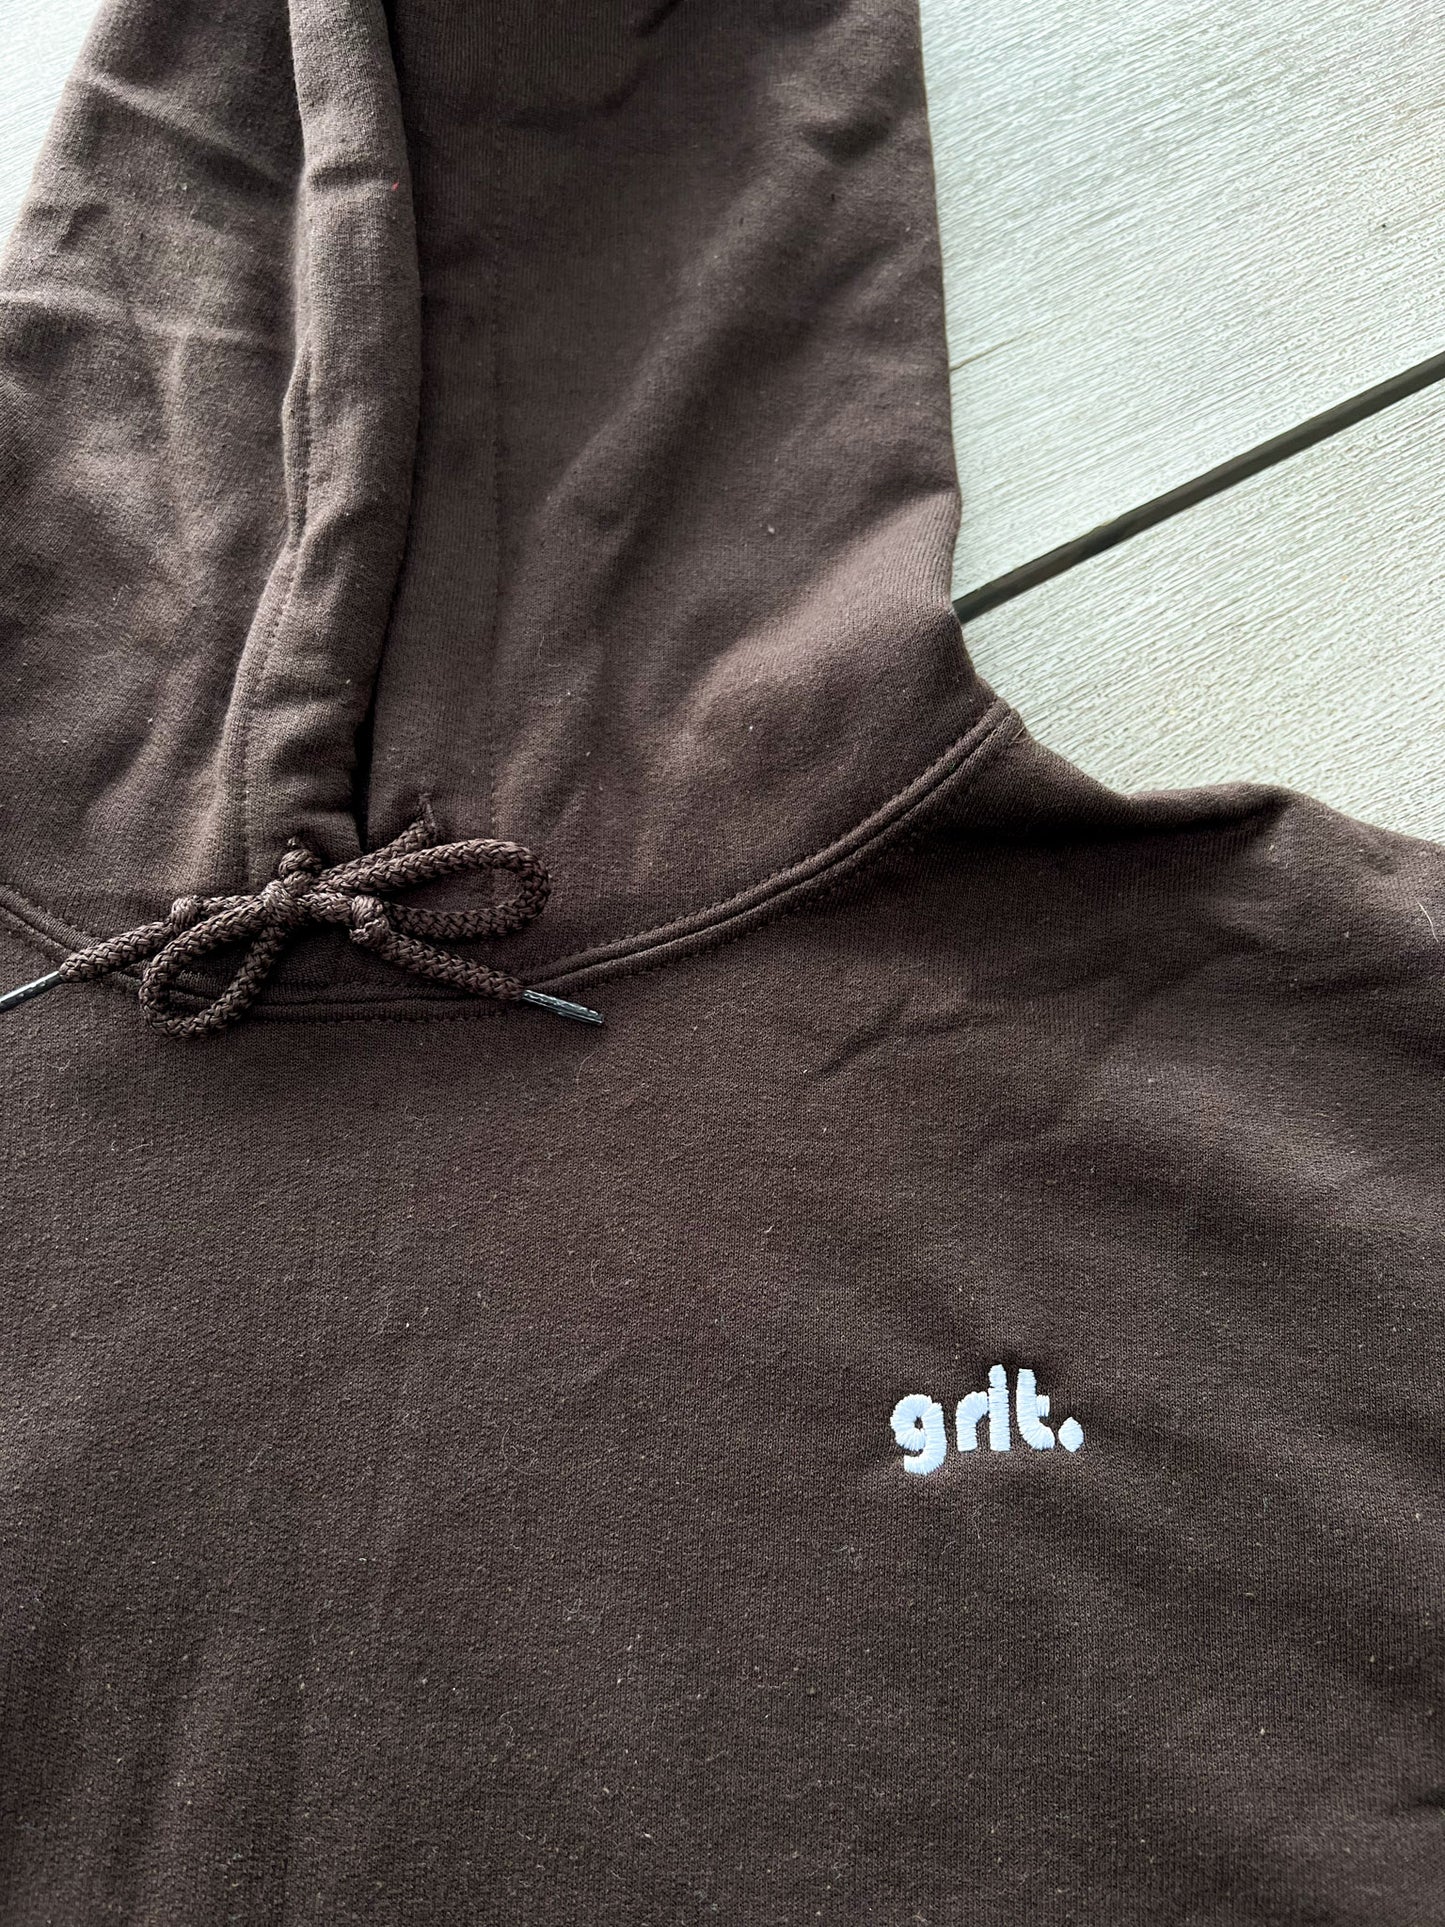 Embroidered Grit Hoodie